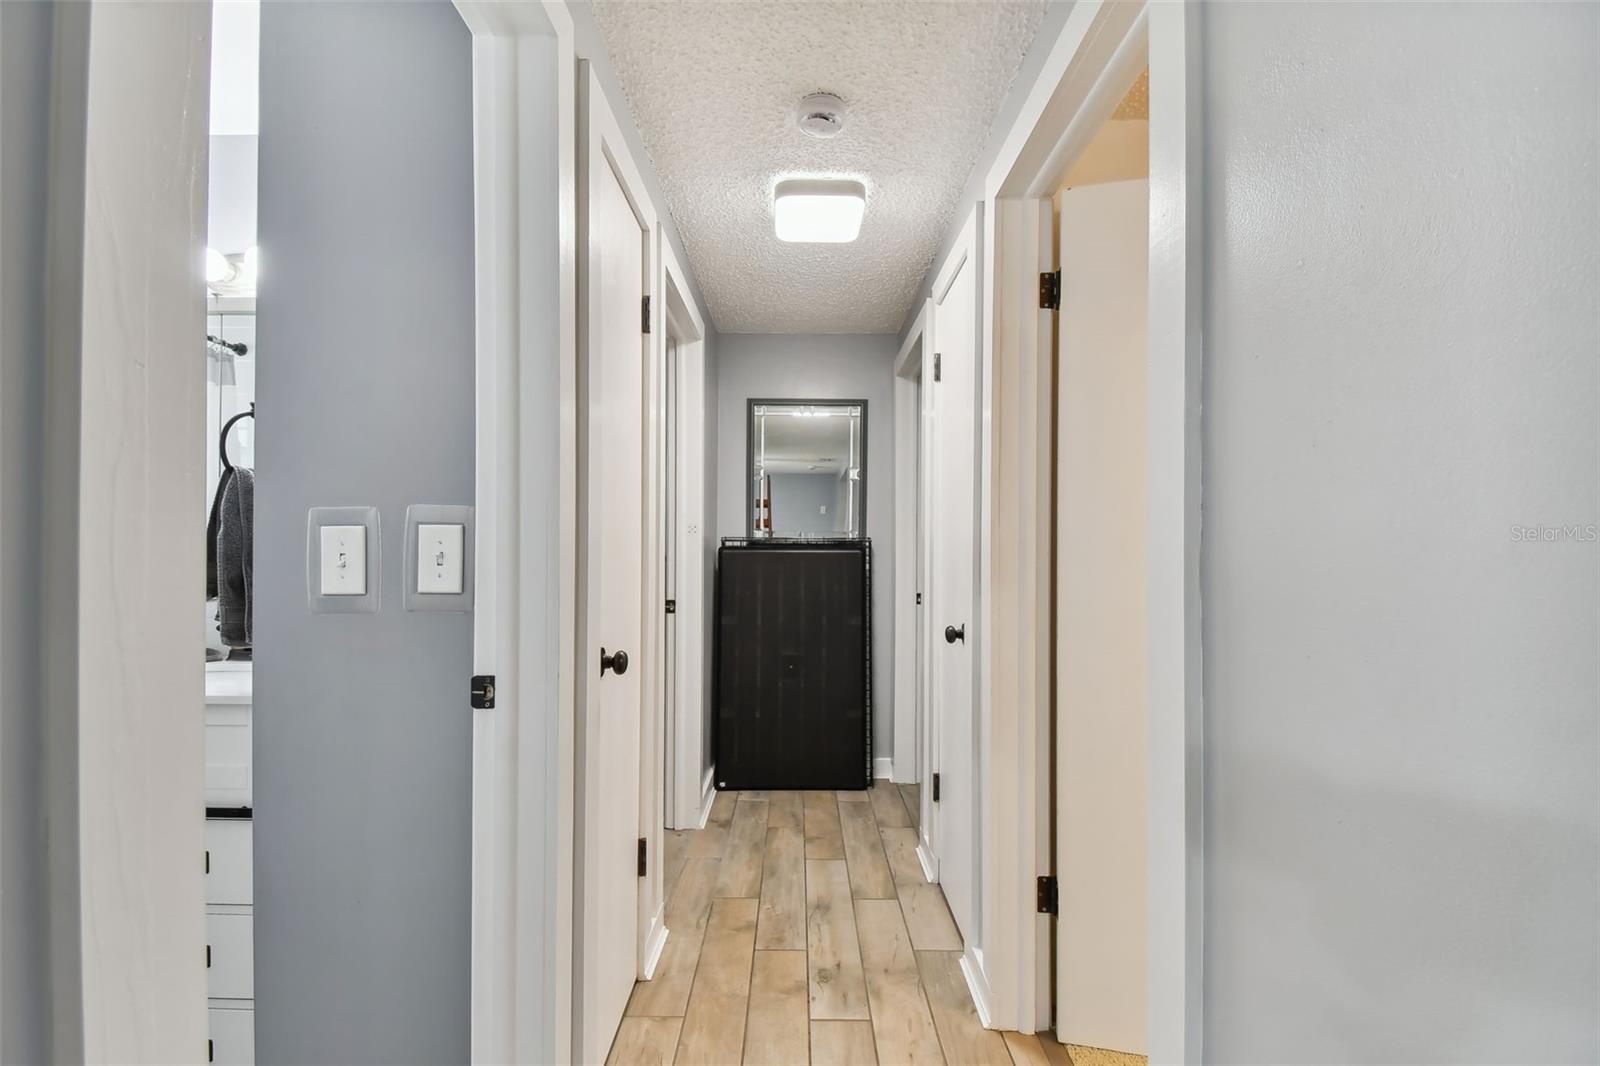 Hallway to the 2nd bath and 3 bedrooms.